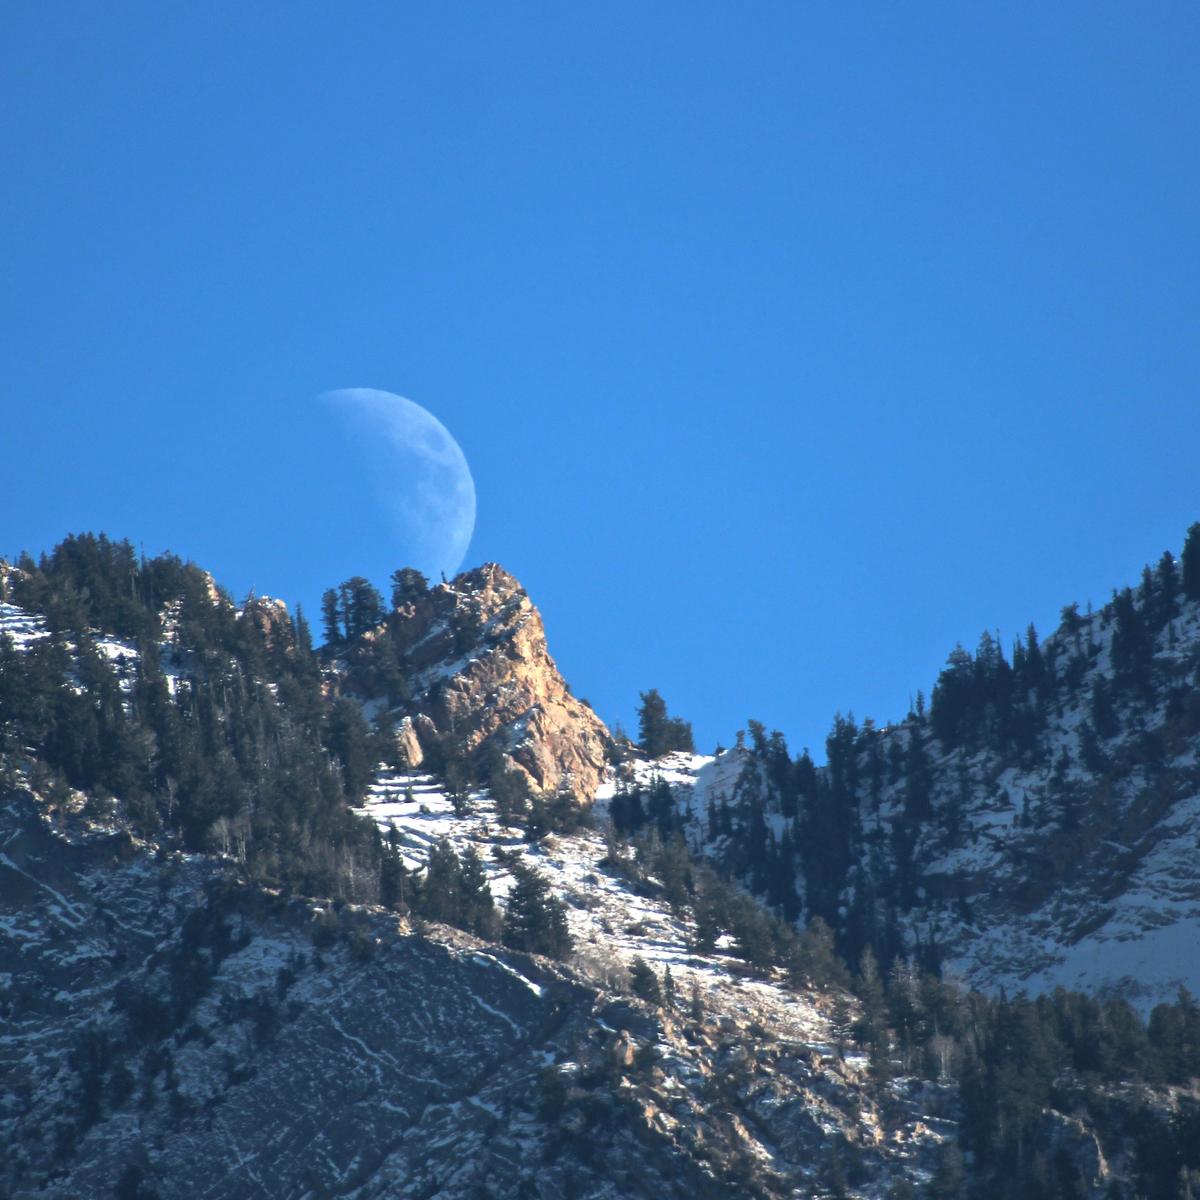 The waxing Moon rises over a ridge in the Wasatch Mountains, Utah on Nov. 14, 2018. (NASA/Bill Dunford)